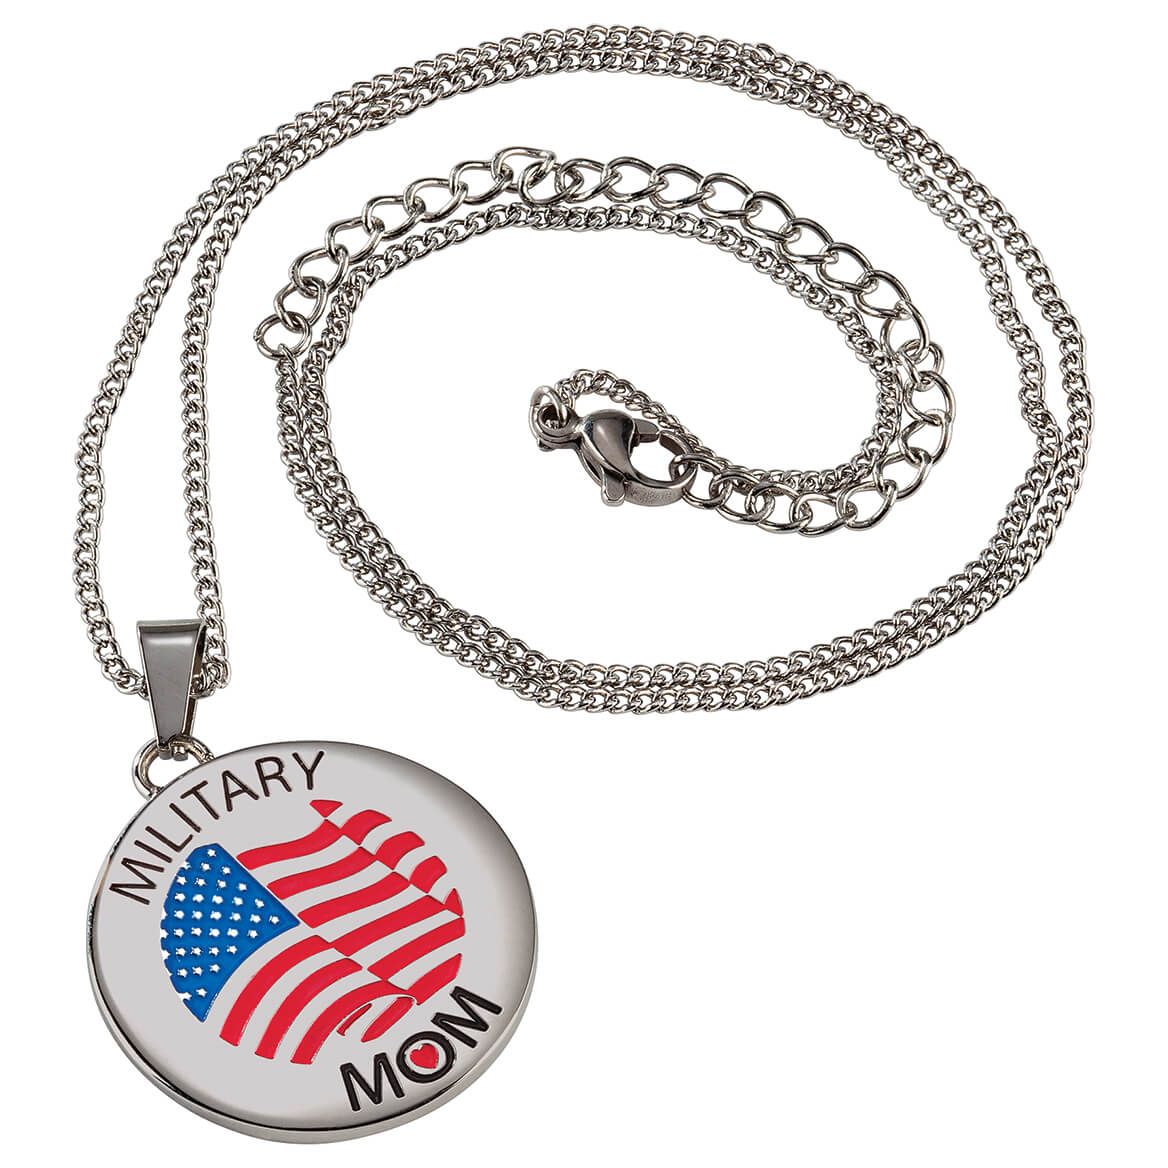 Personalized Military Mom Necklace + '-' + 376726